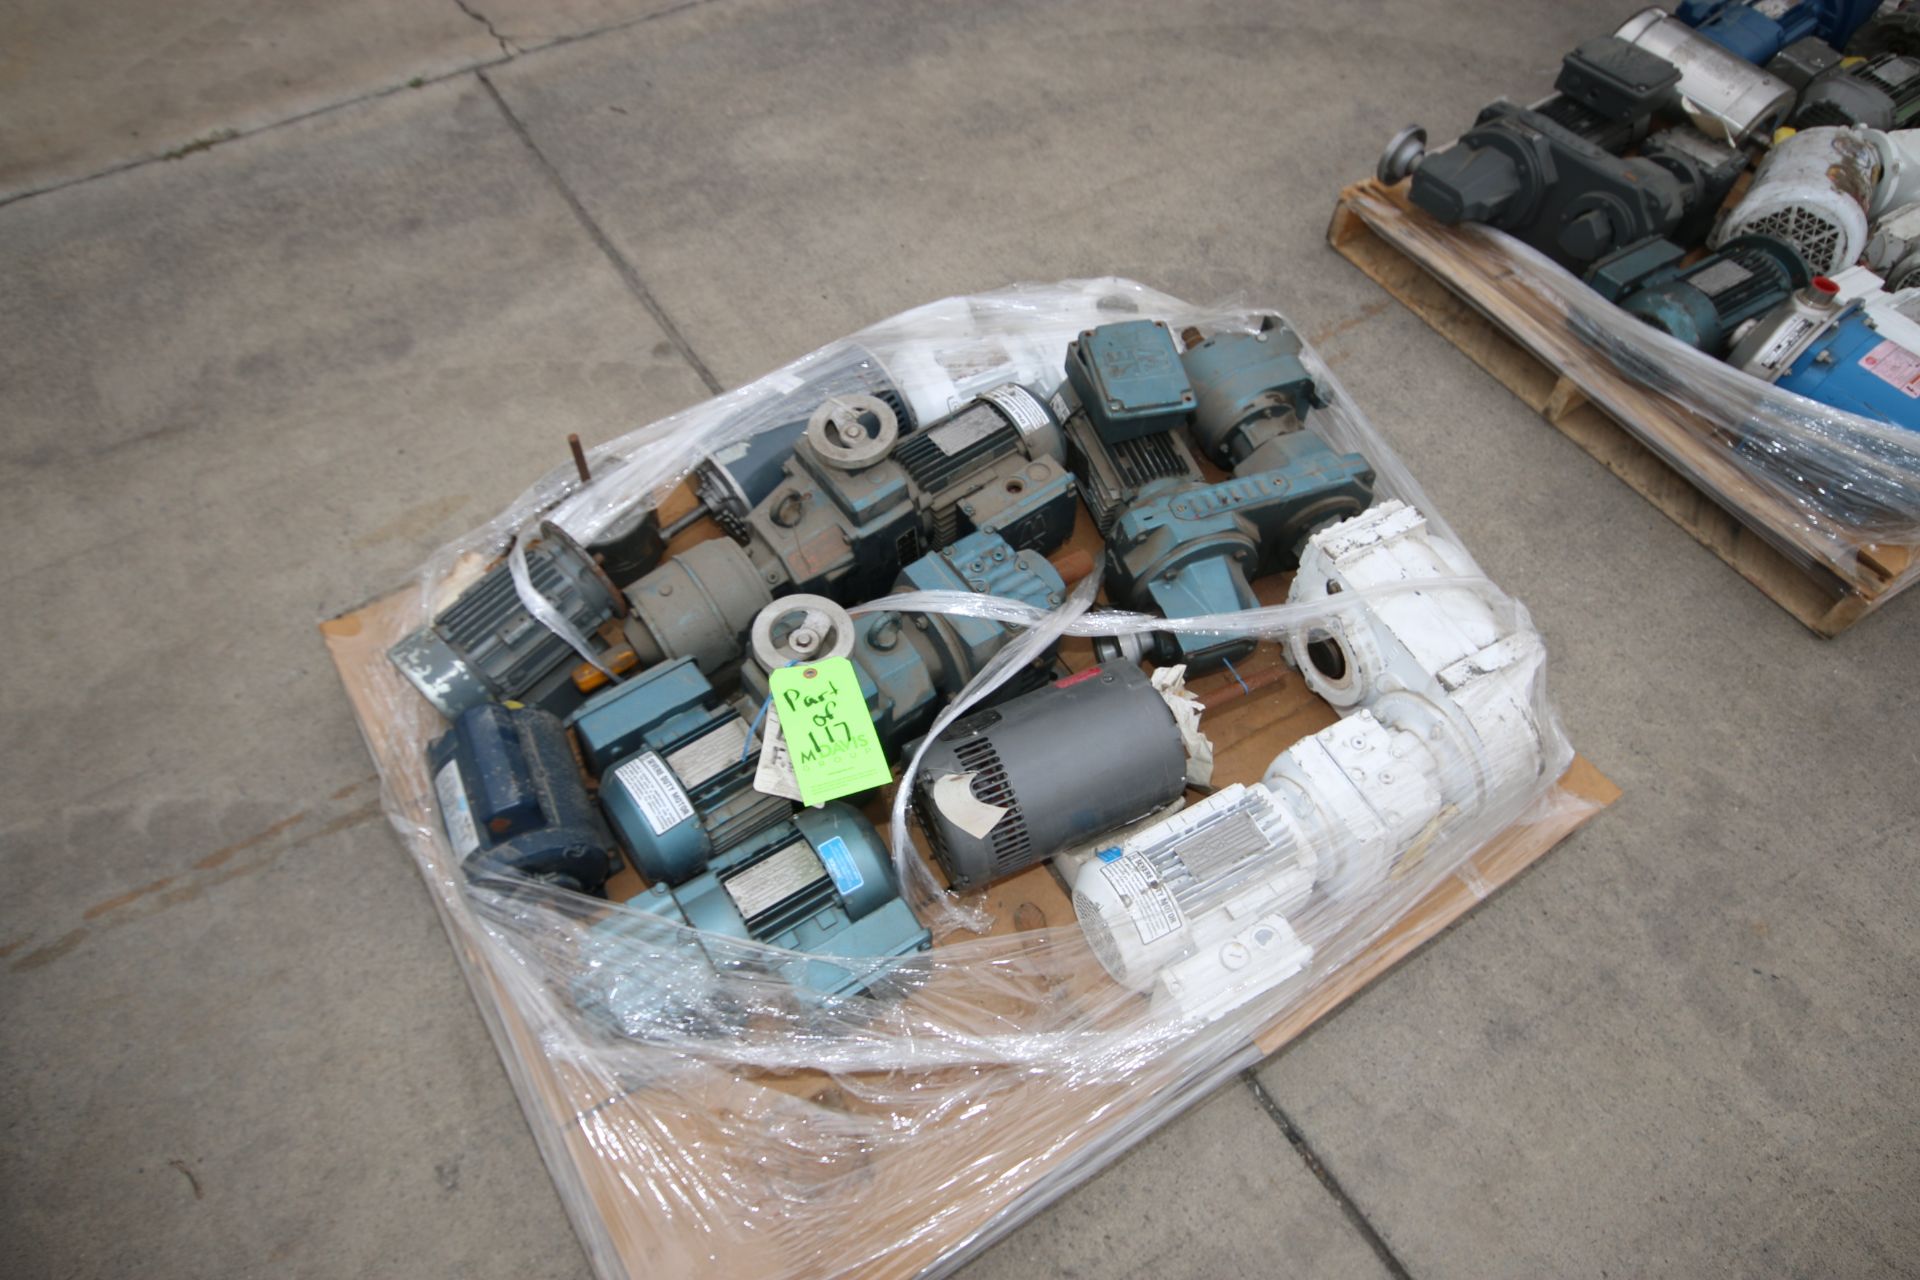 3-Pallets of USED Motors and Drives, Aprox. (40) Drives/Motors, Includes hp Range from 1/2- 5 hp